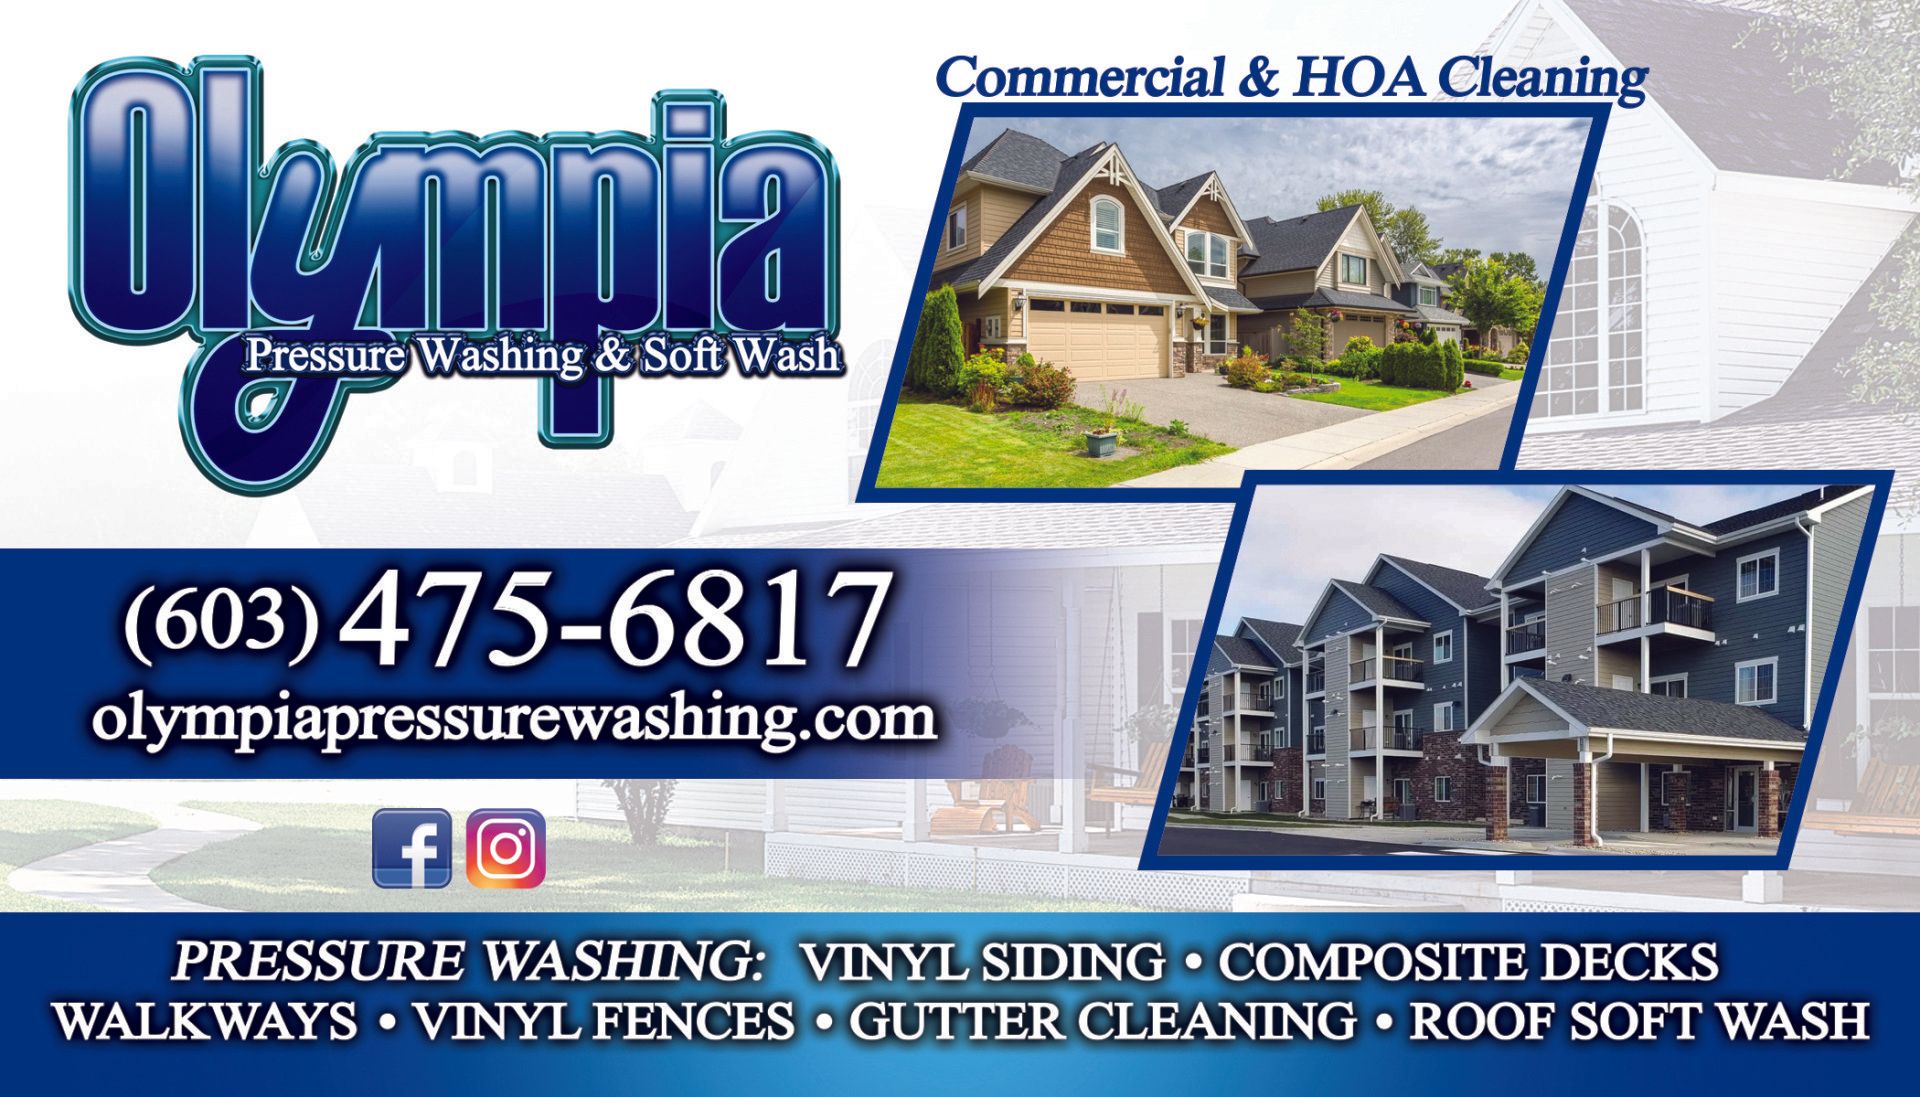 Call Olympia Pressure Washing & Soft Wash for Commercial & HOA Cleaning